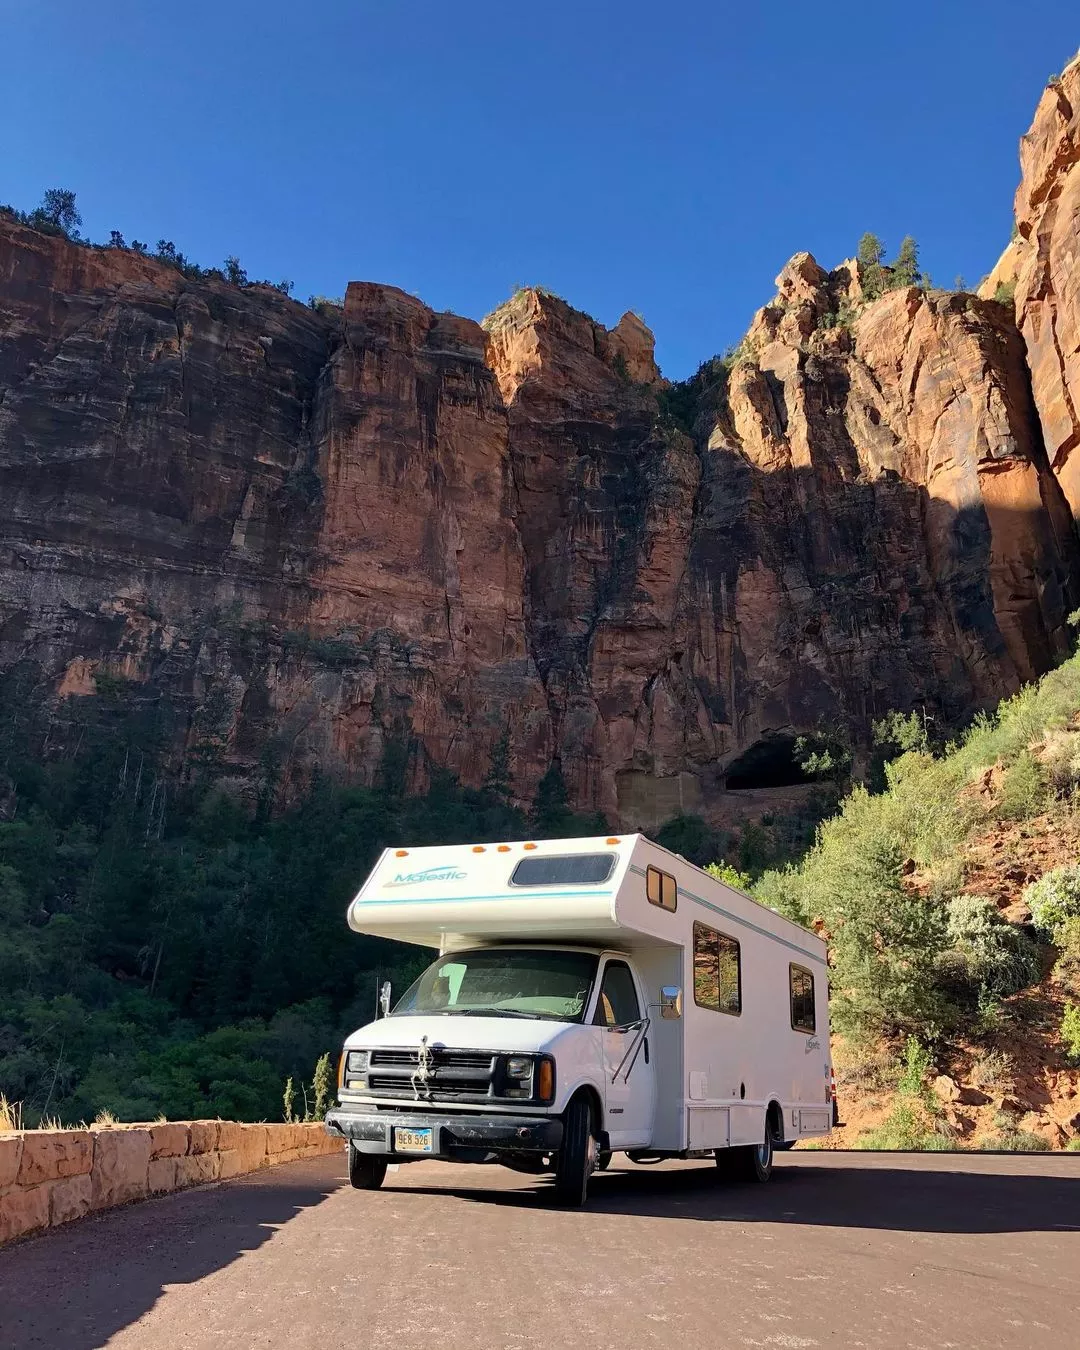 https://www.extraspace.com/blog/wp-content/uploads/2021/06/rv-living-101-types-of-rvs-to-live-in.jpeg.webp